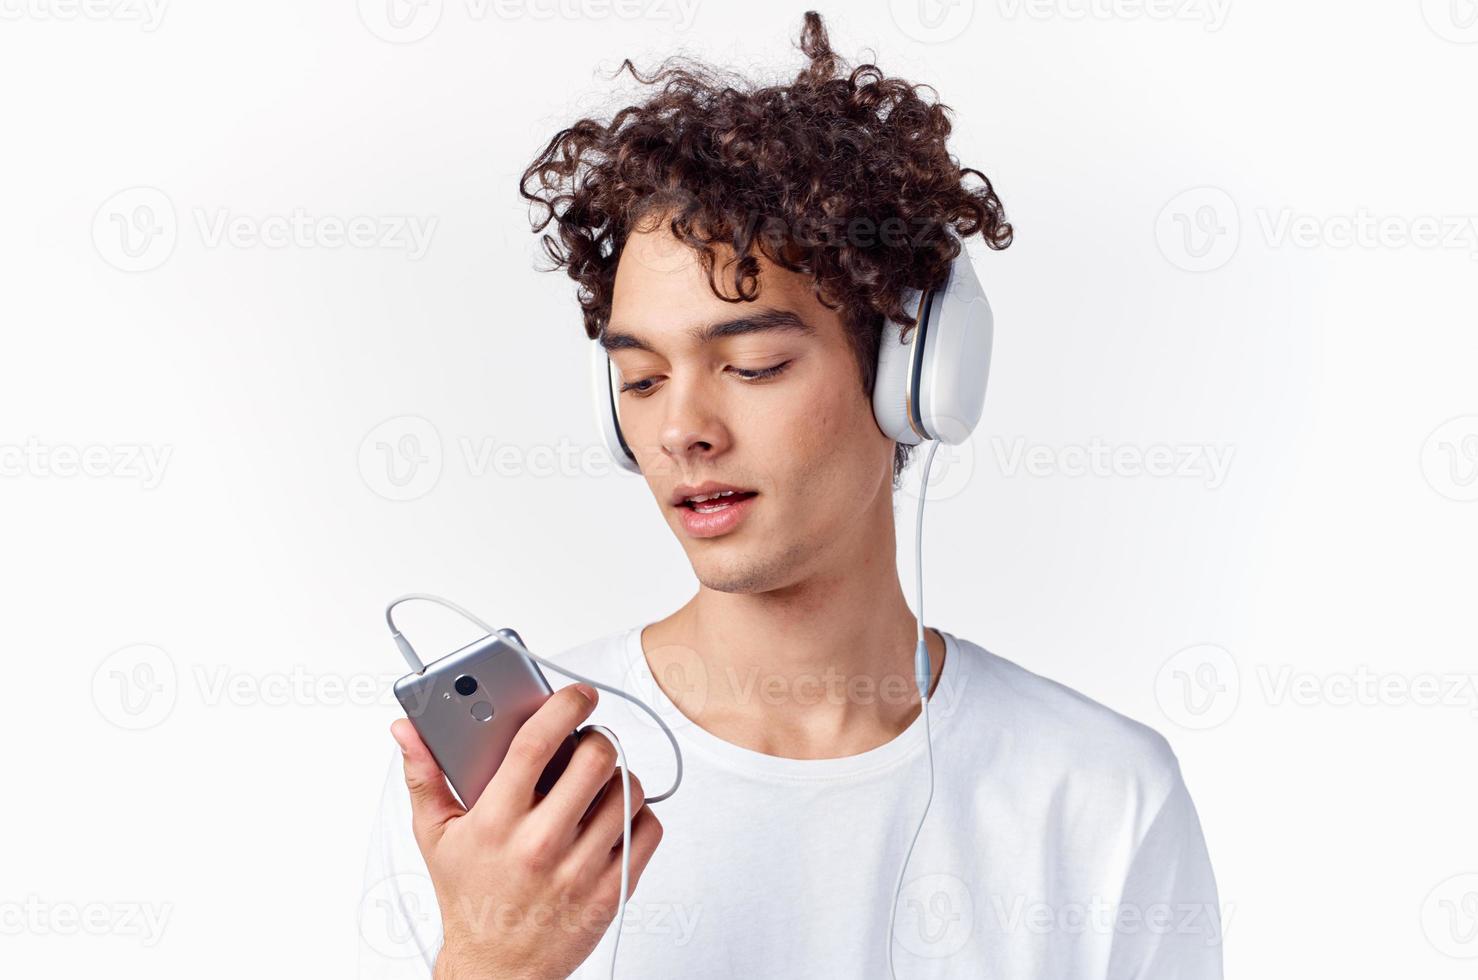 guy with curly hair in a white t-shirt listens to music technology photo